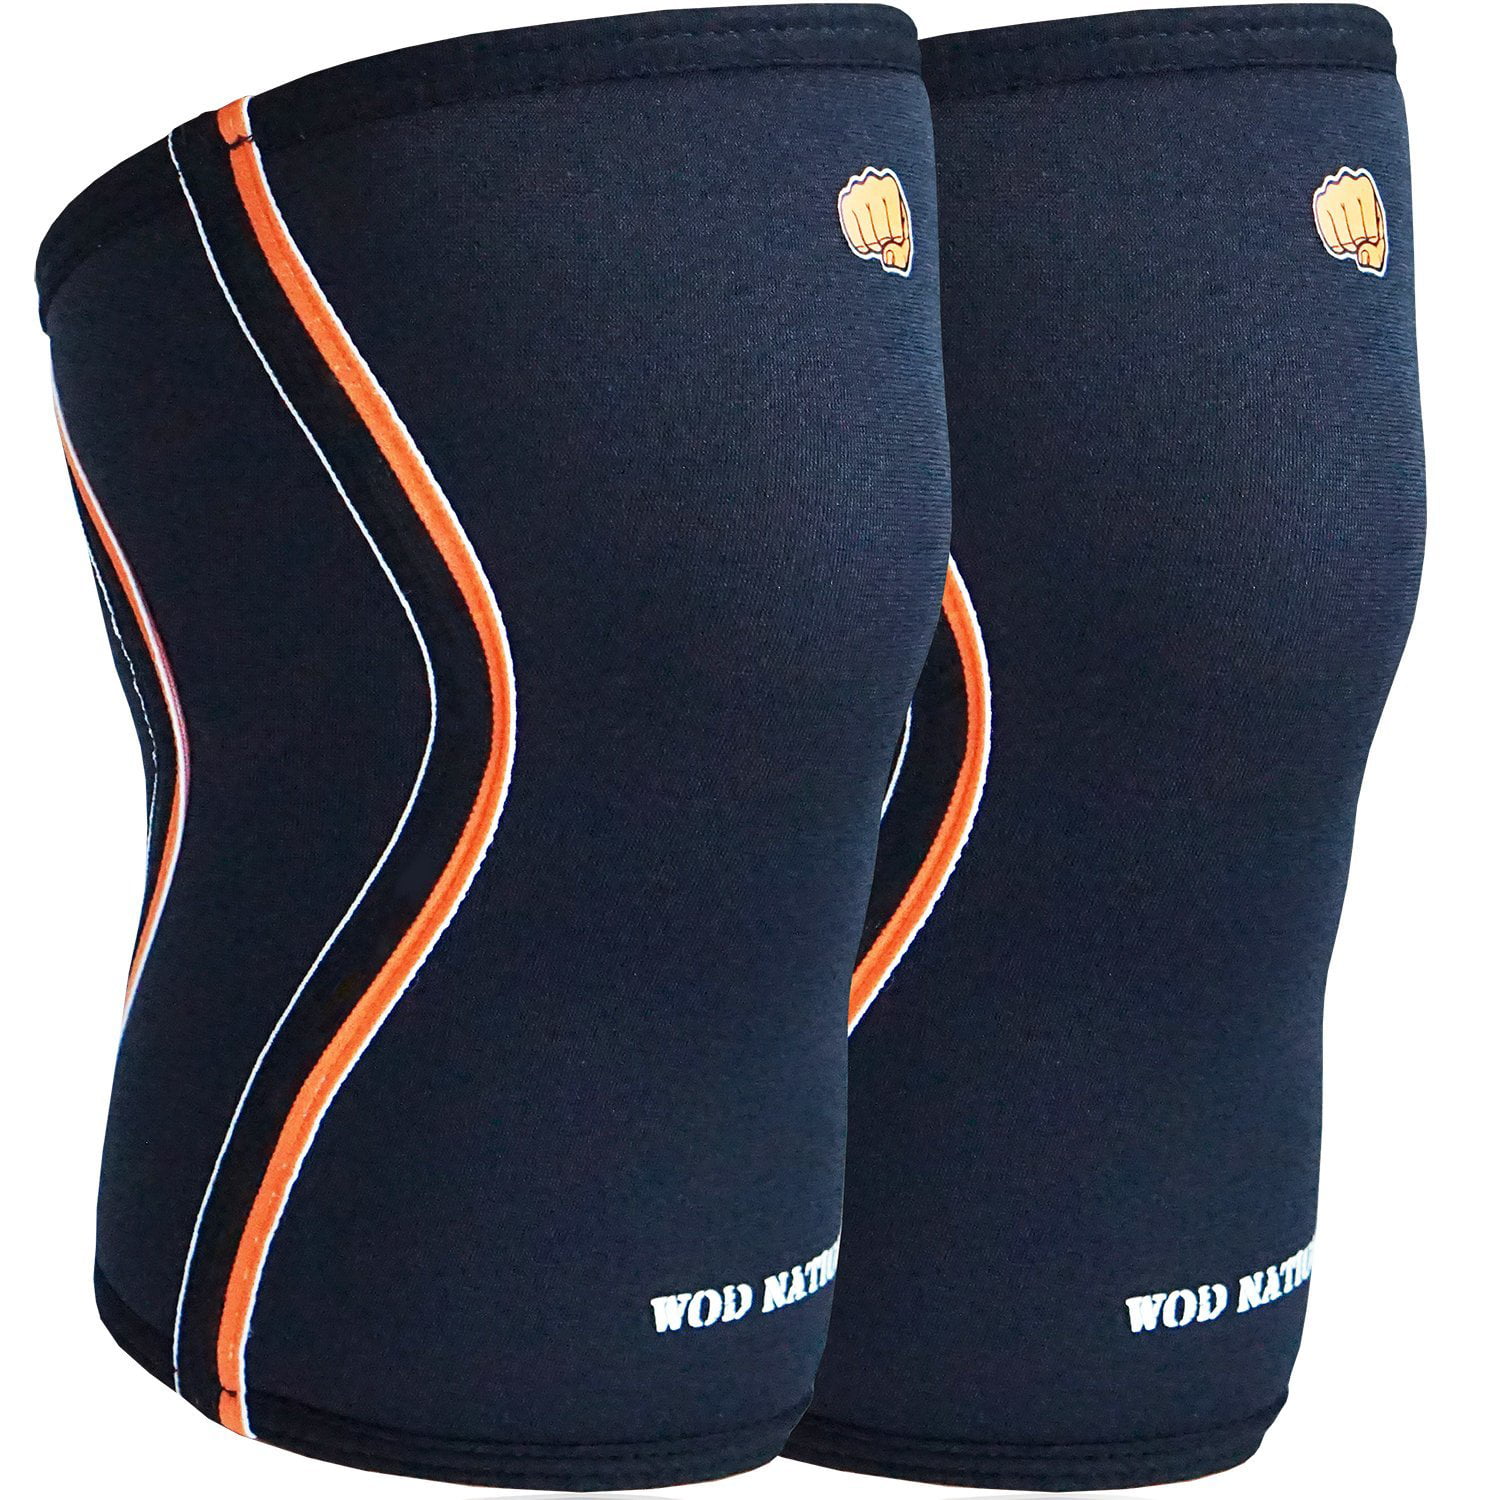 Woods Black RL Bear Grips: 5mm Knee Sleeves ligaments Ideal for Weight Lifting Contouring Design to Protect tendons Squats